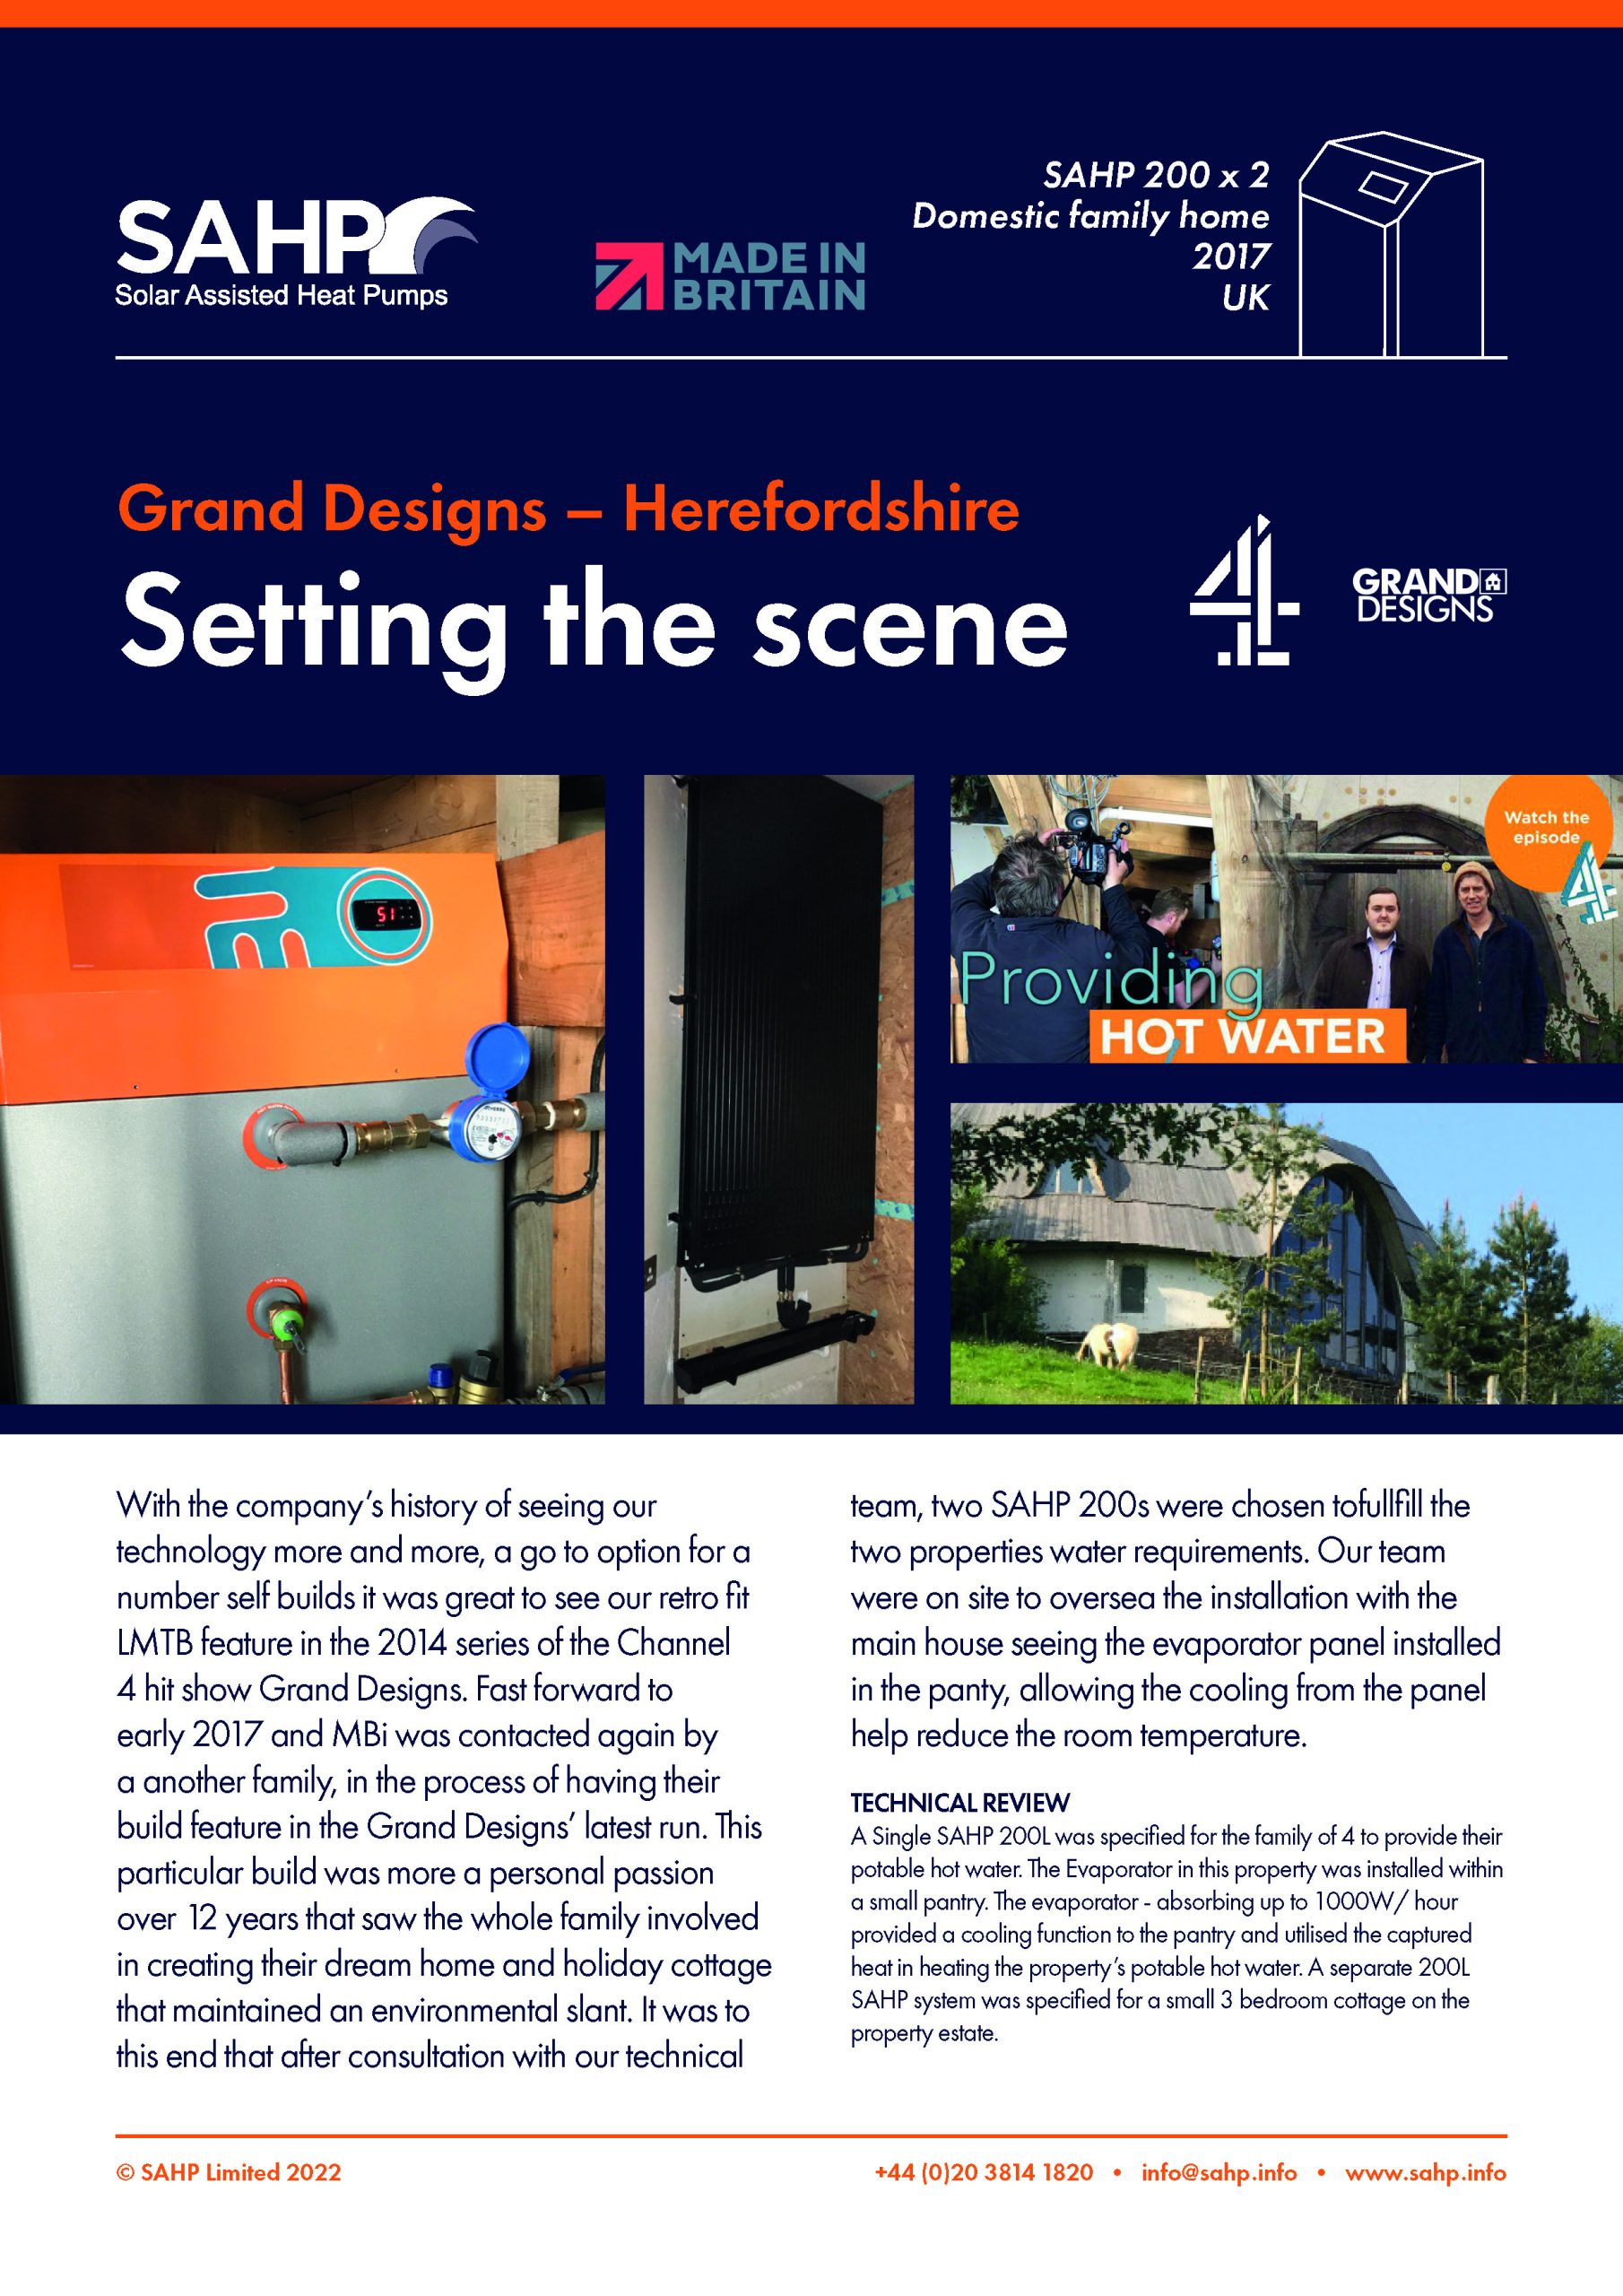 SAHP Feature sheet — Grand Designs Herefordshire